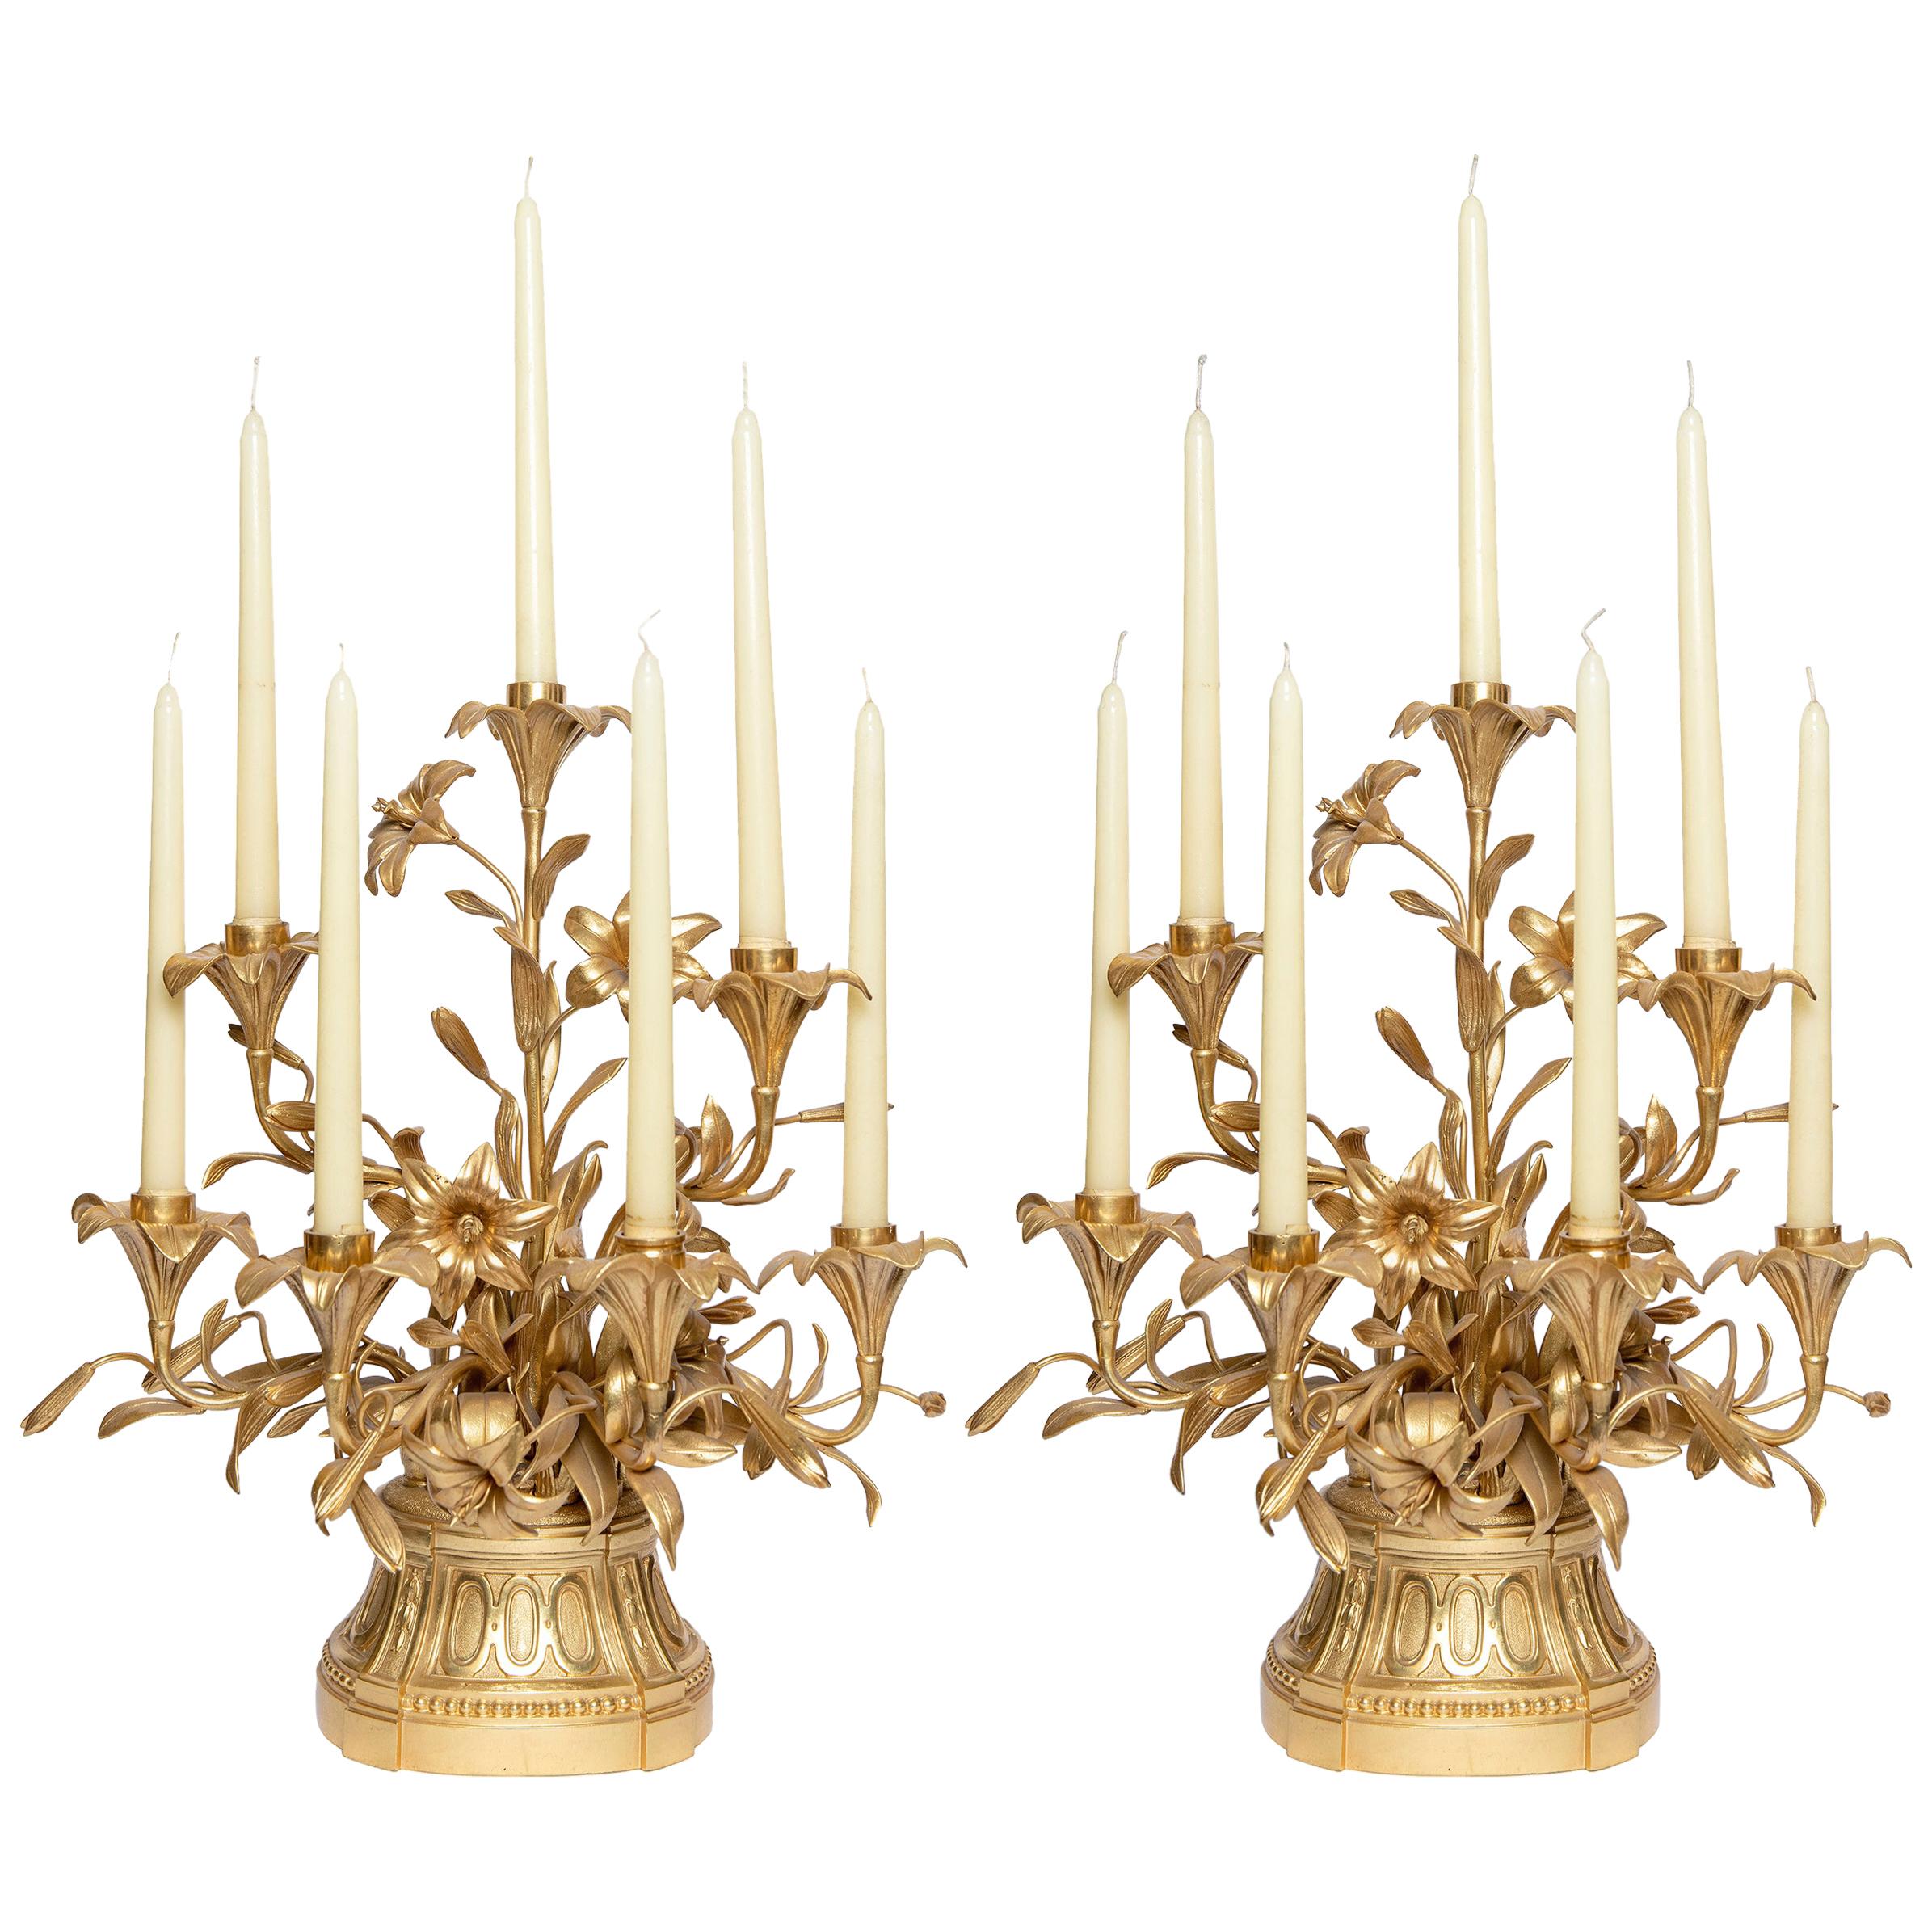 Pair of Gilt Bronze Candelabras with Flowers, France, Late 19th Century